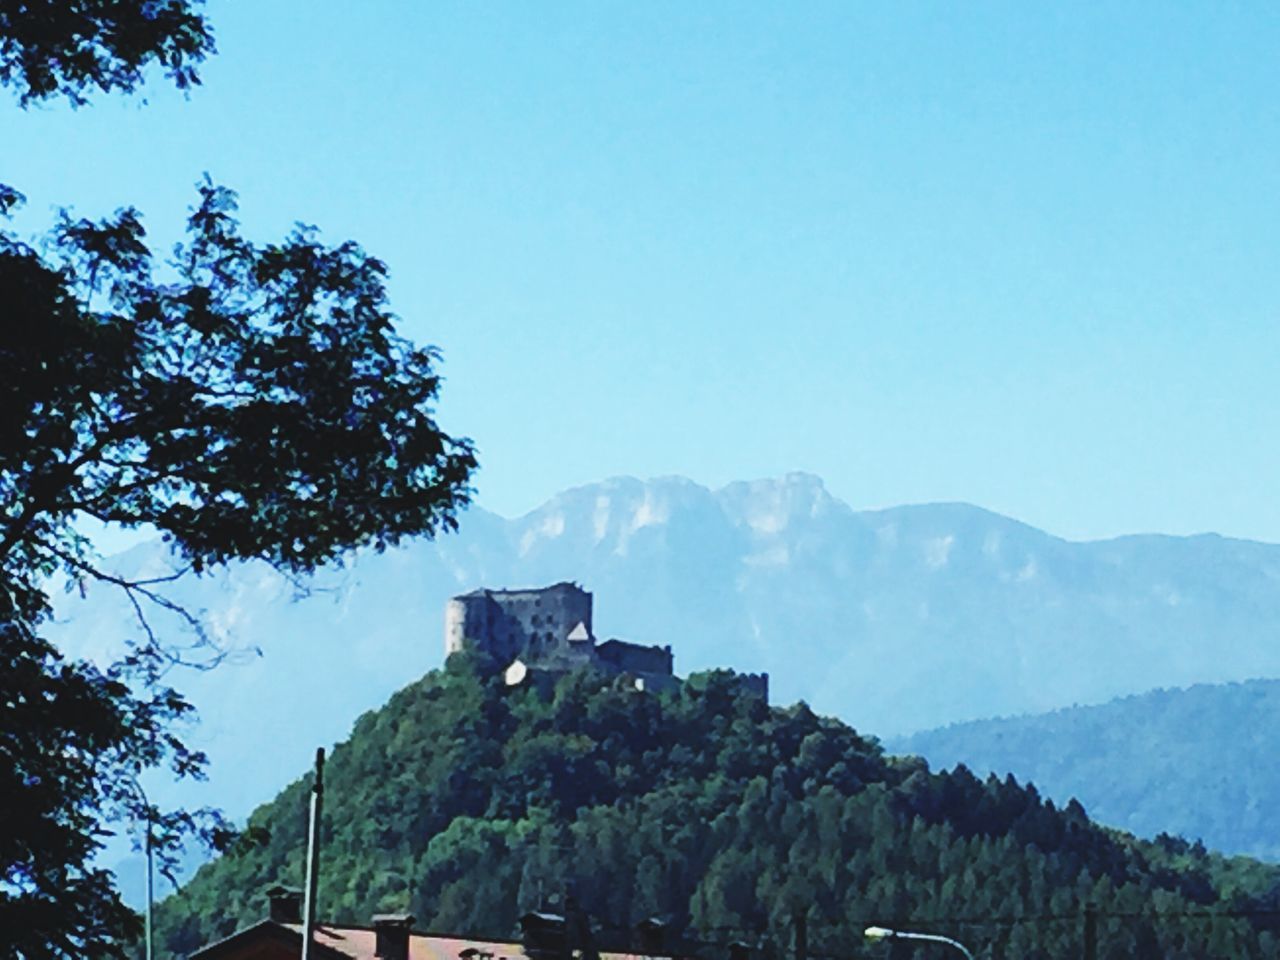 VIEW OF CASTLE AGAINST CLEAR SKY